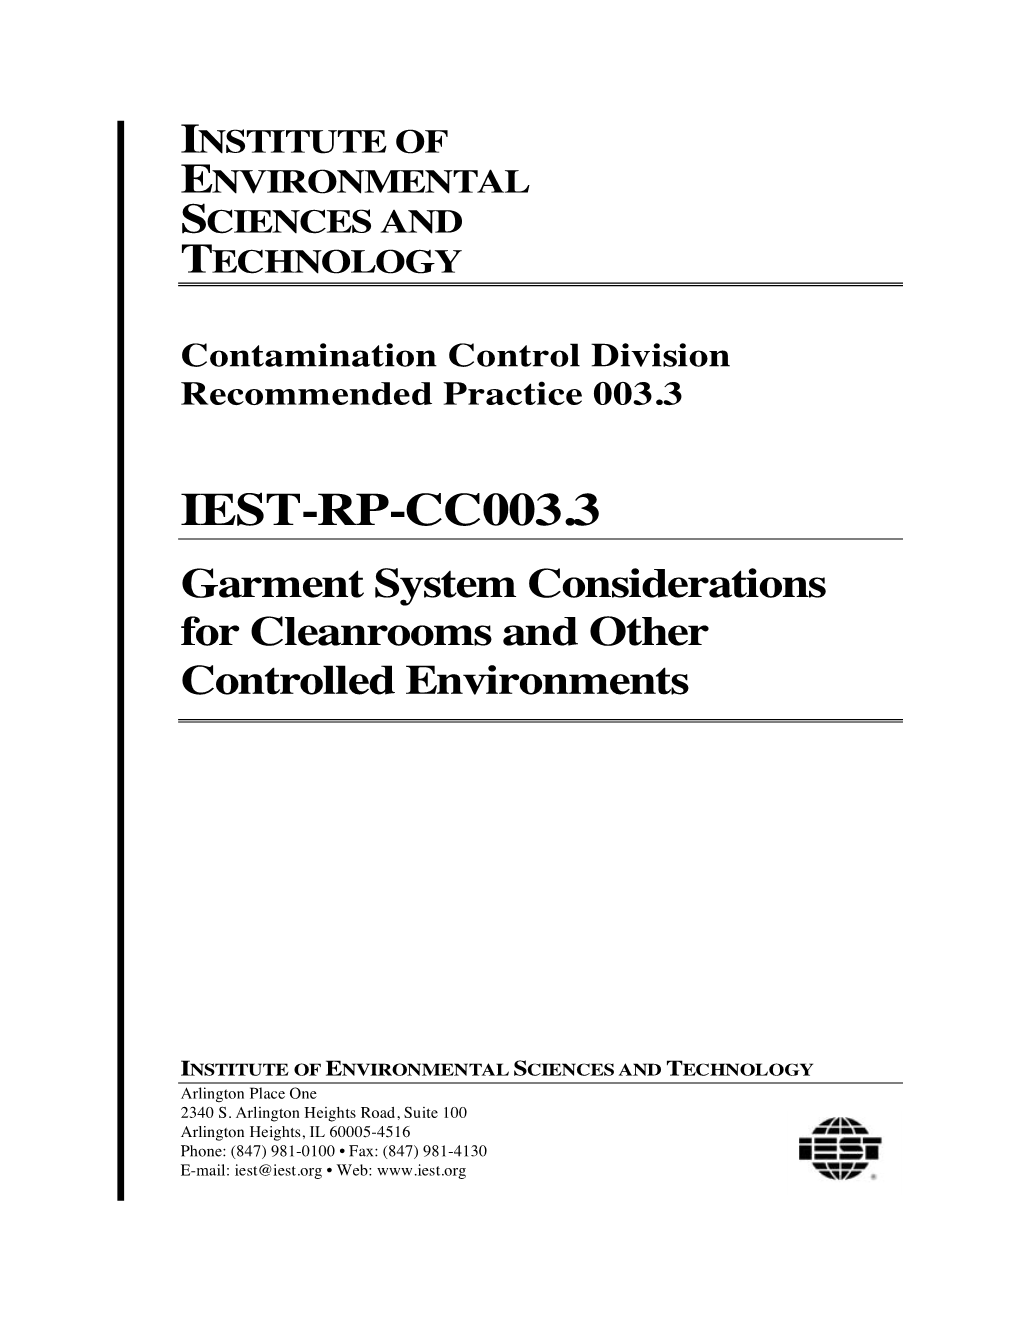 IEST-RP-CC003.3 Garment System Considerations for Cleanrooms and Other Controlled Environments